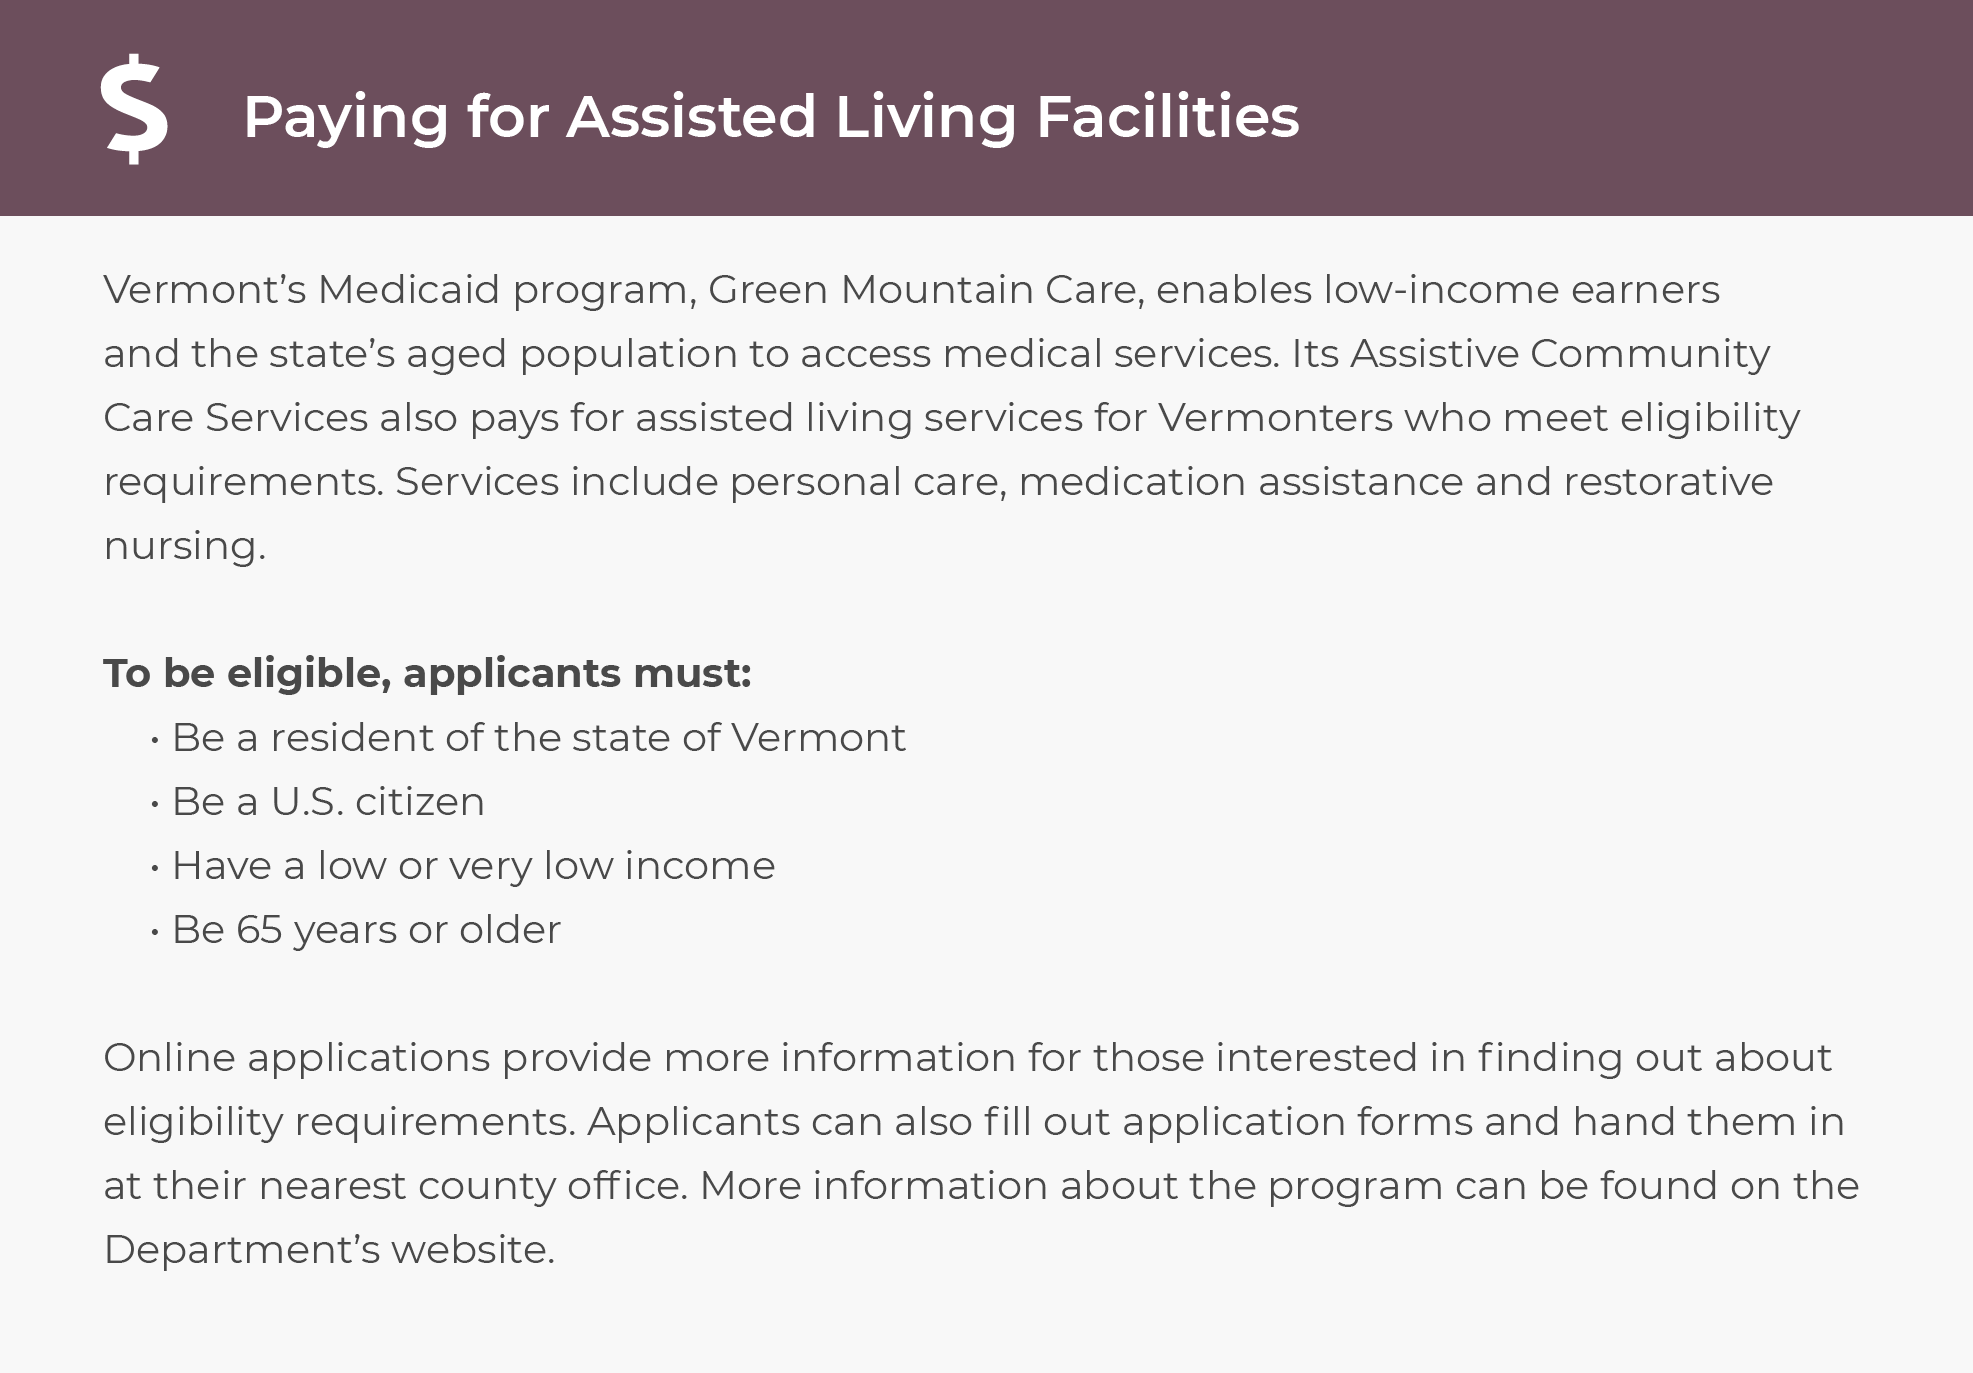 How to Get Financial Assistance for Assisted Living in VT